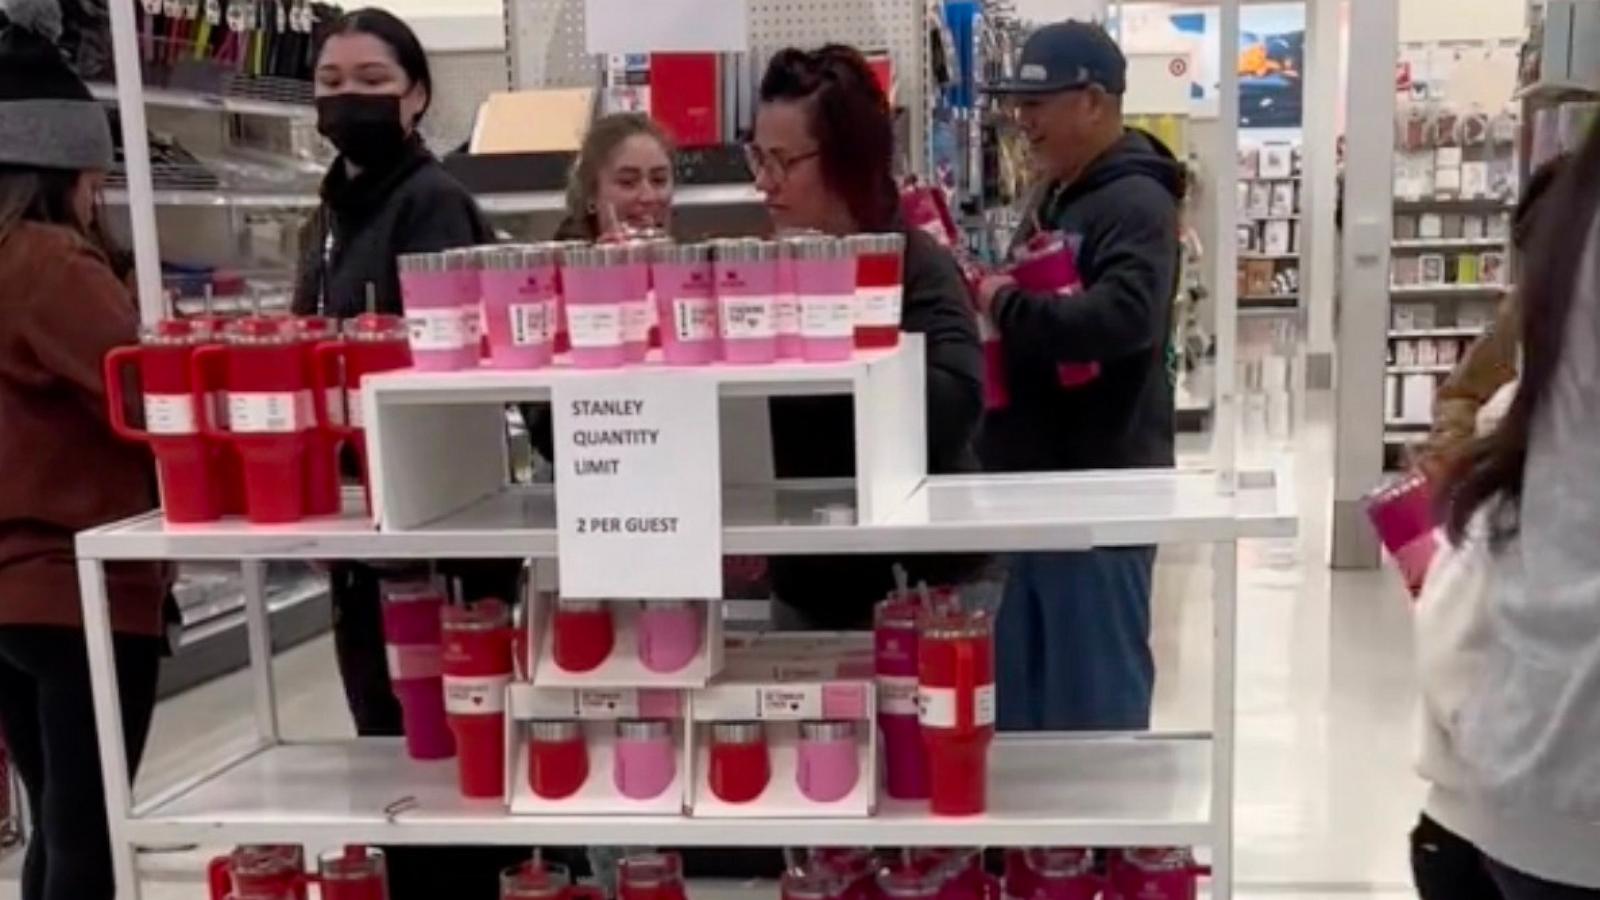 Target Shoppers Are 'Getting Trampled' for a Limited Edition Stanley Cup